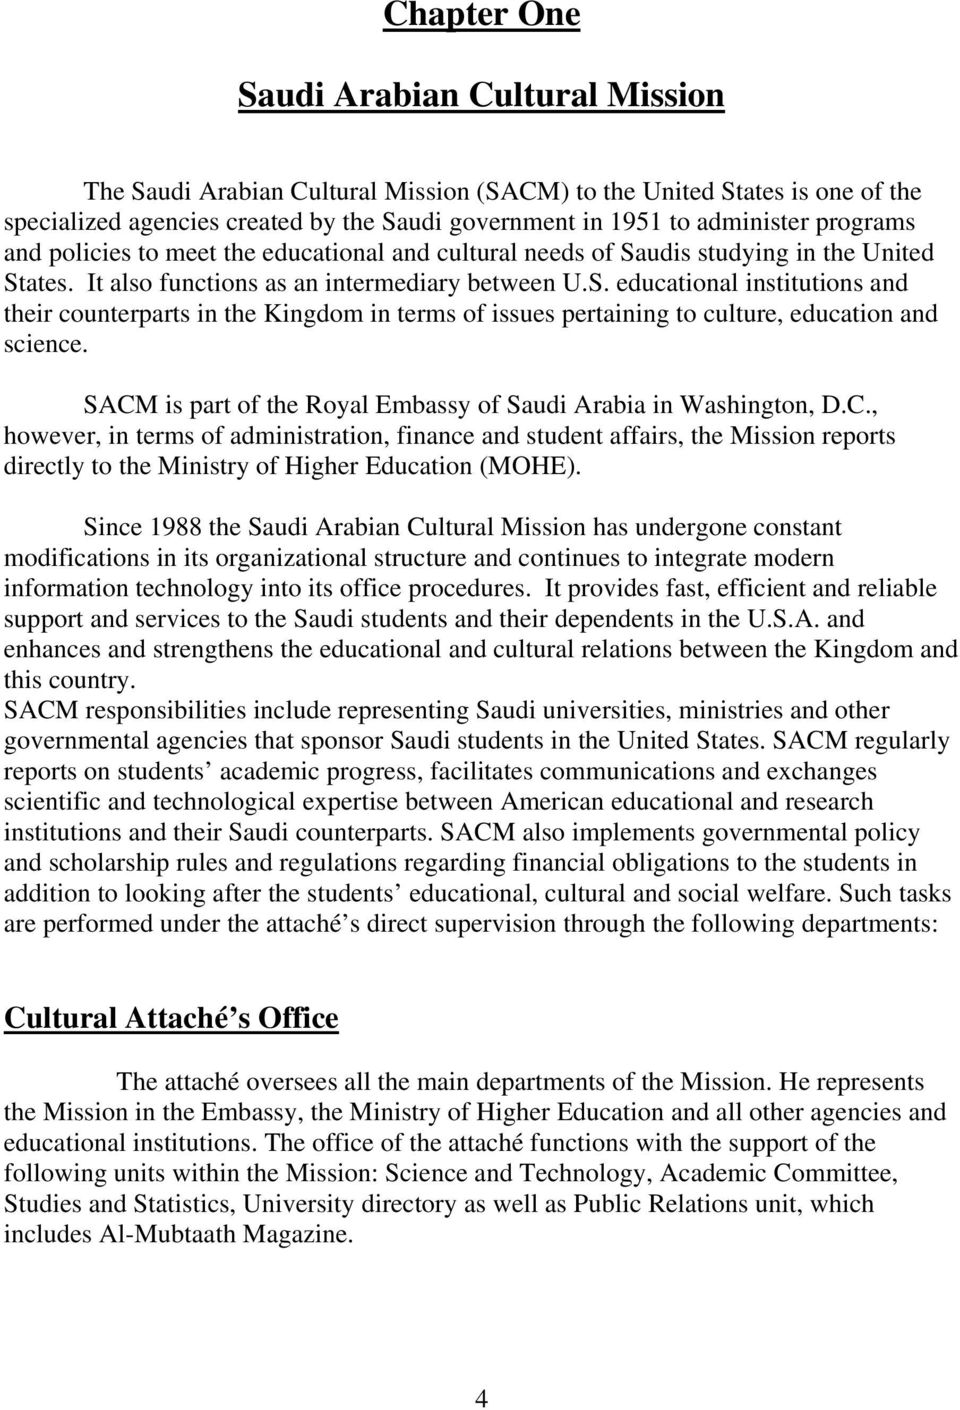 SACM is part of the Royal Embassy of Saudi Arabia in Washington, D.C., however, in terms of administration, finance and student affairs, the Mission reports directly to the Ministry of Higher Education (MOHE).